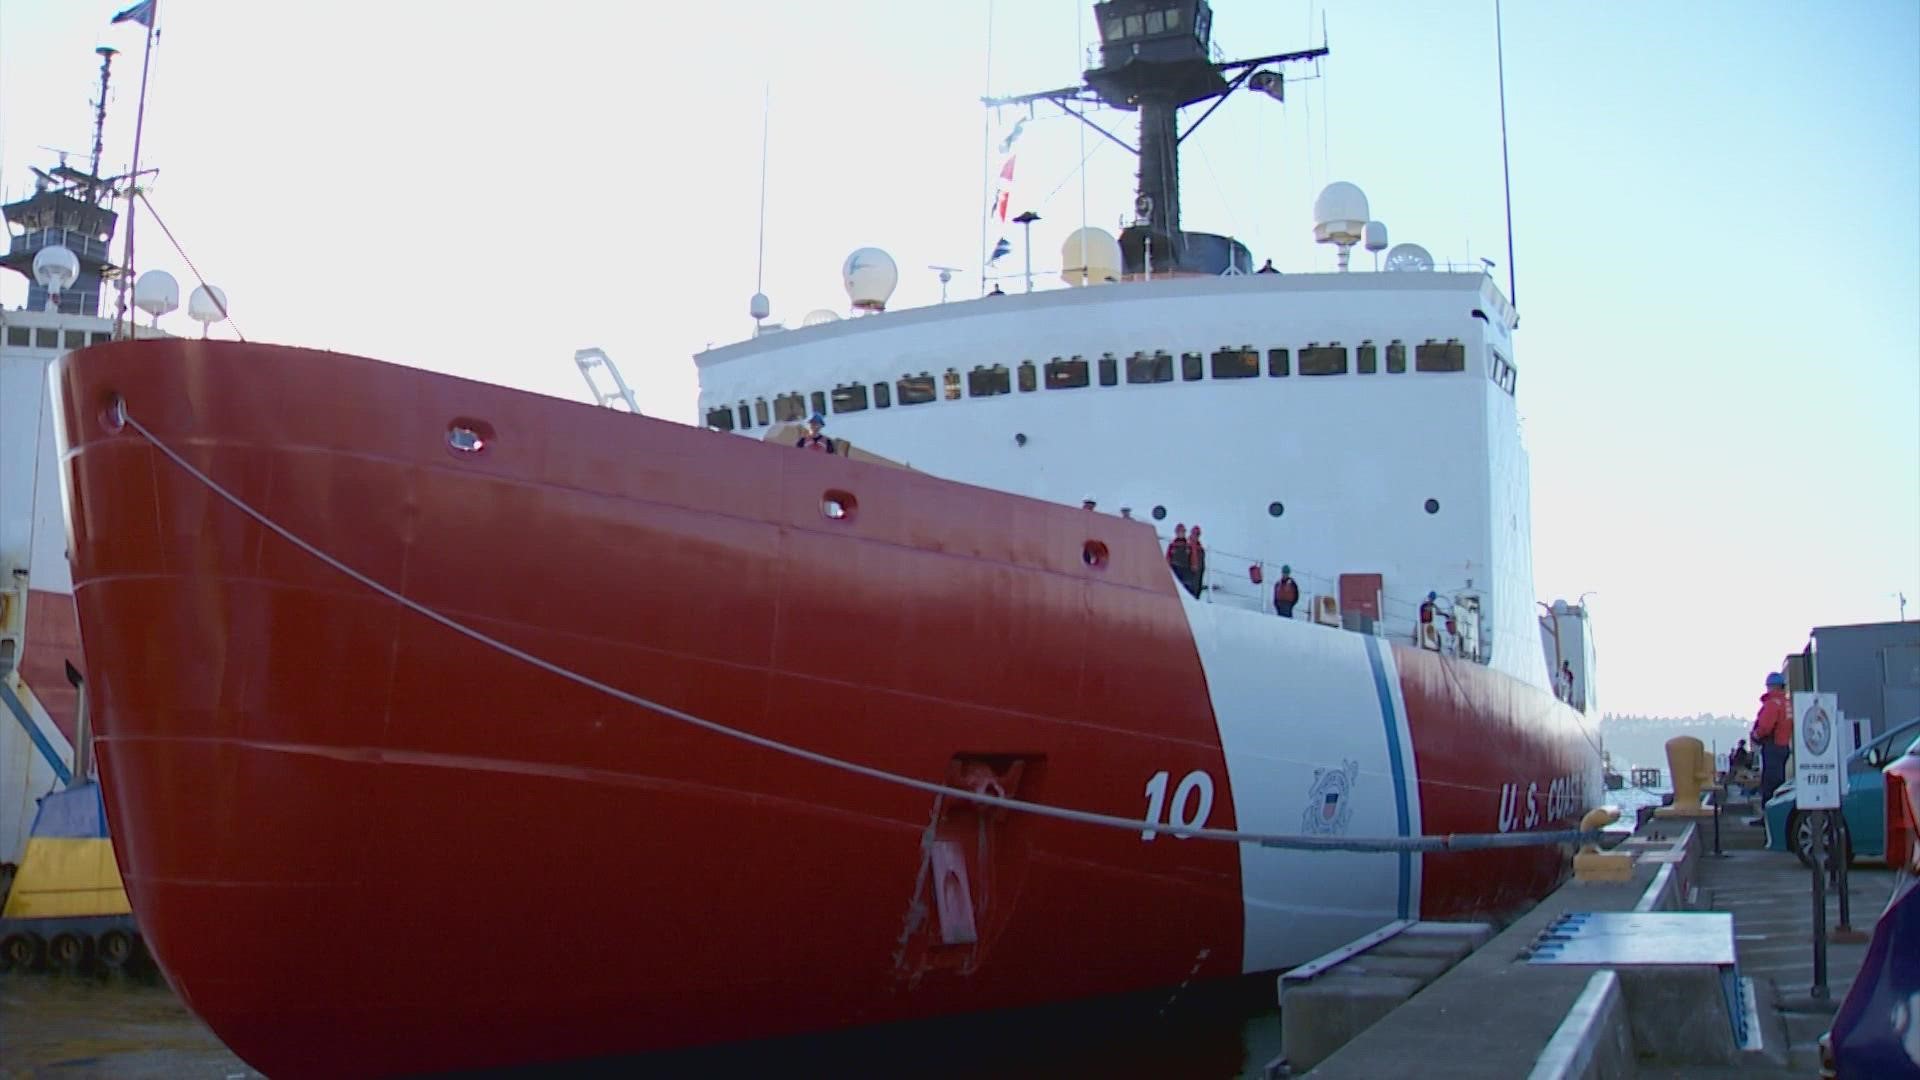 The Coast Guard’s heavy icebreaker, Polar Star, has departed to support a joint military service mission called Operation Deep Freeze.